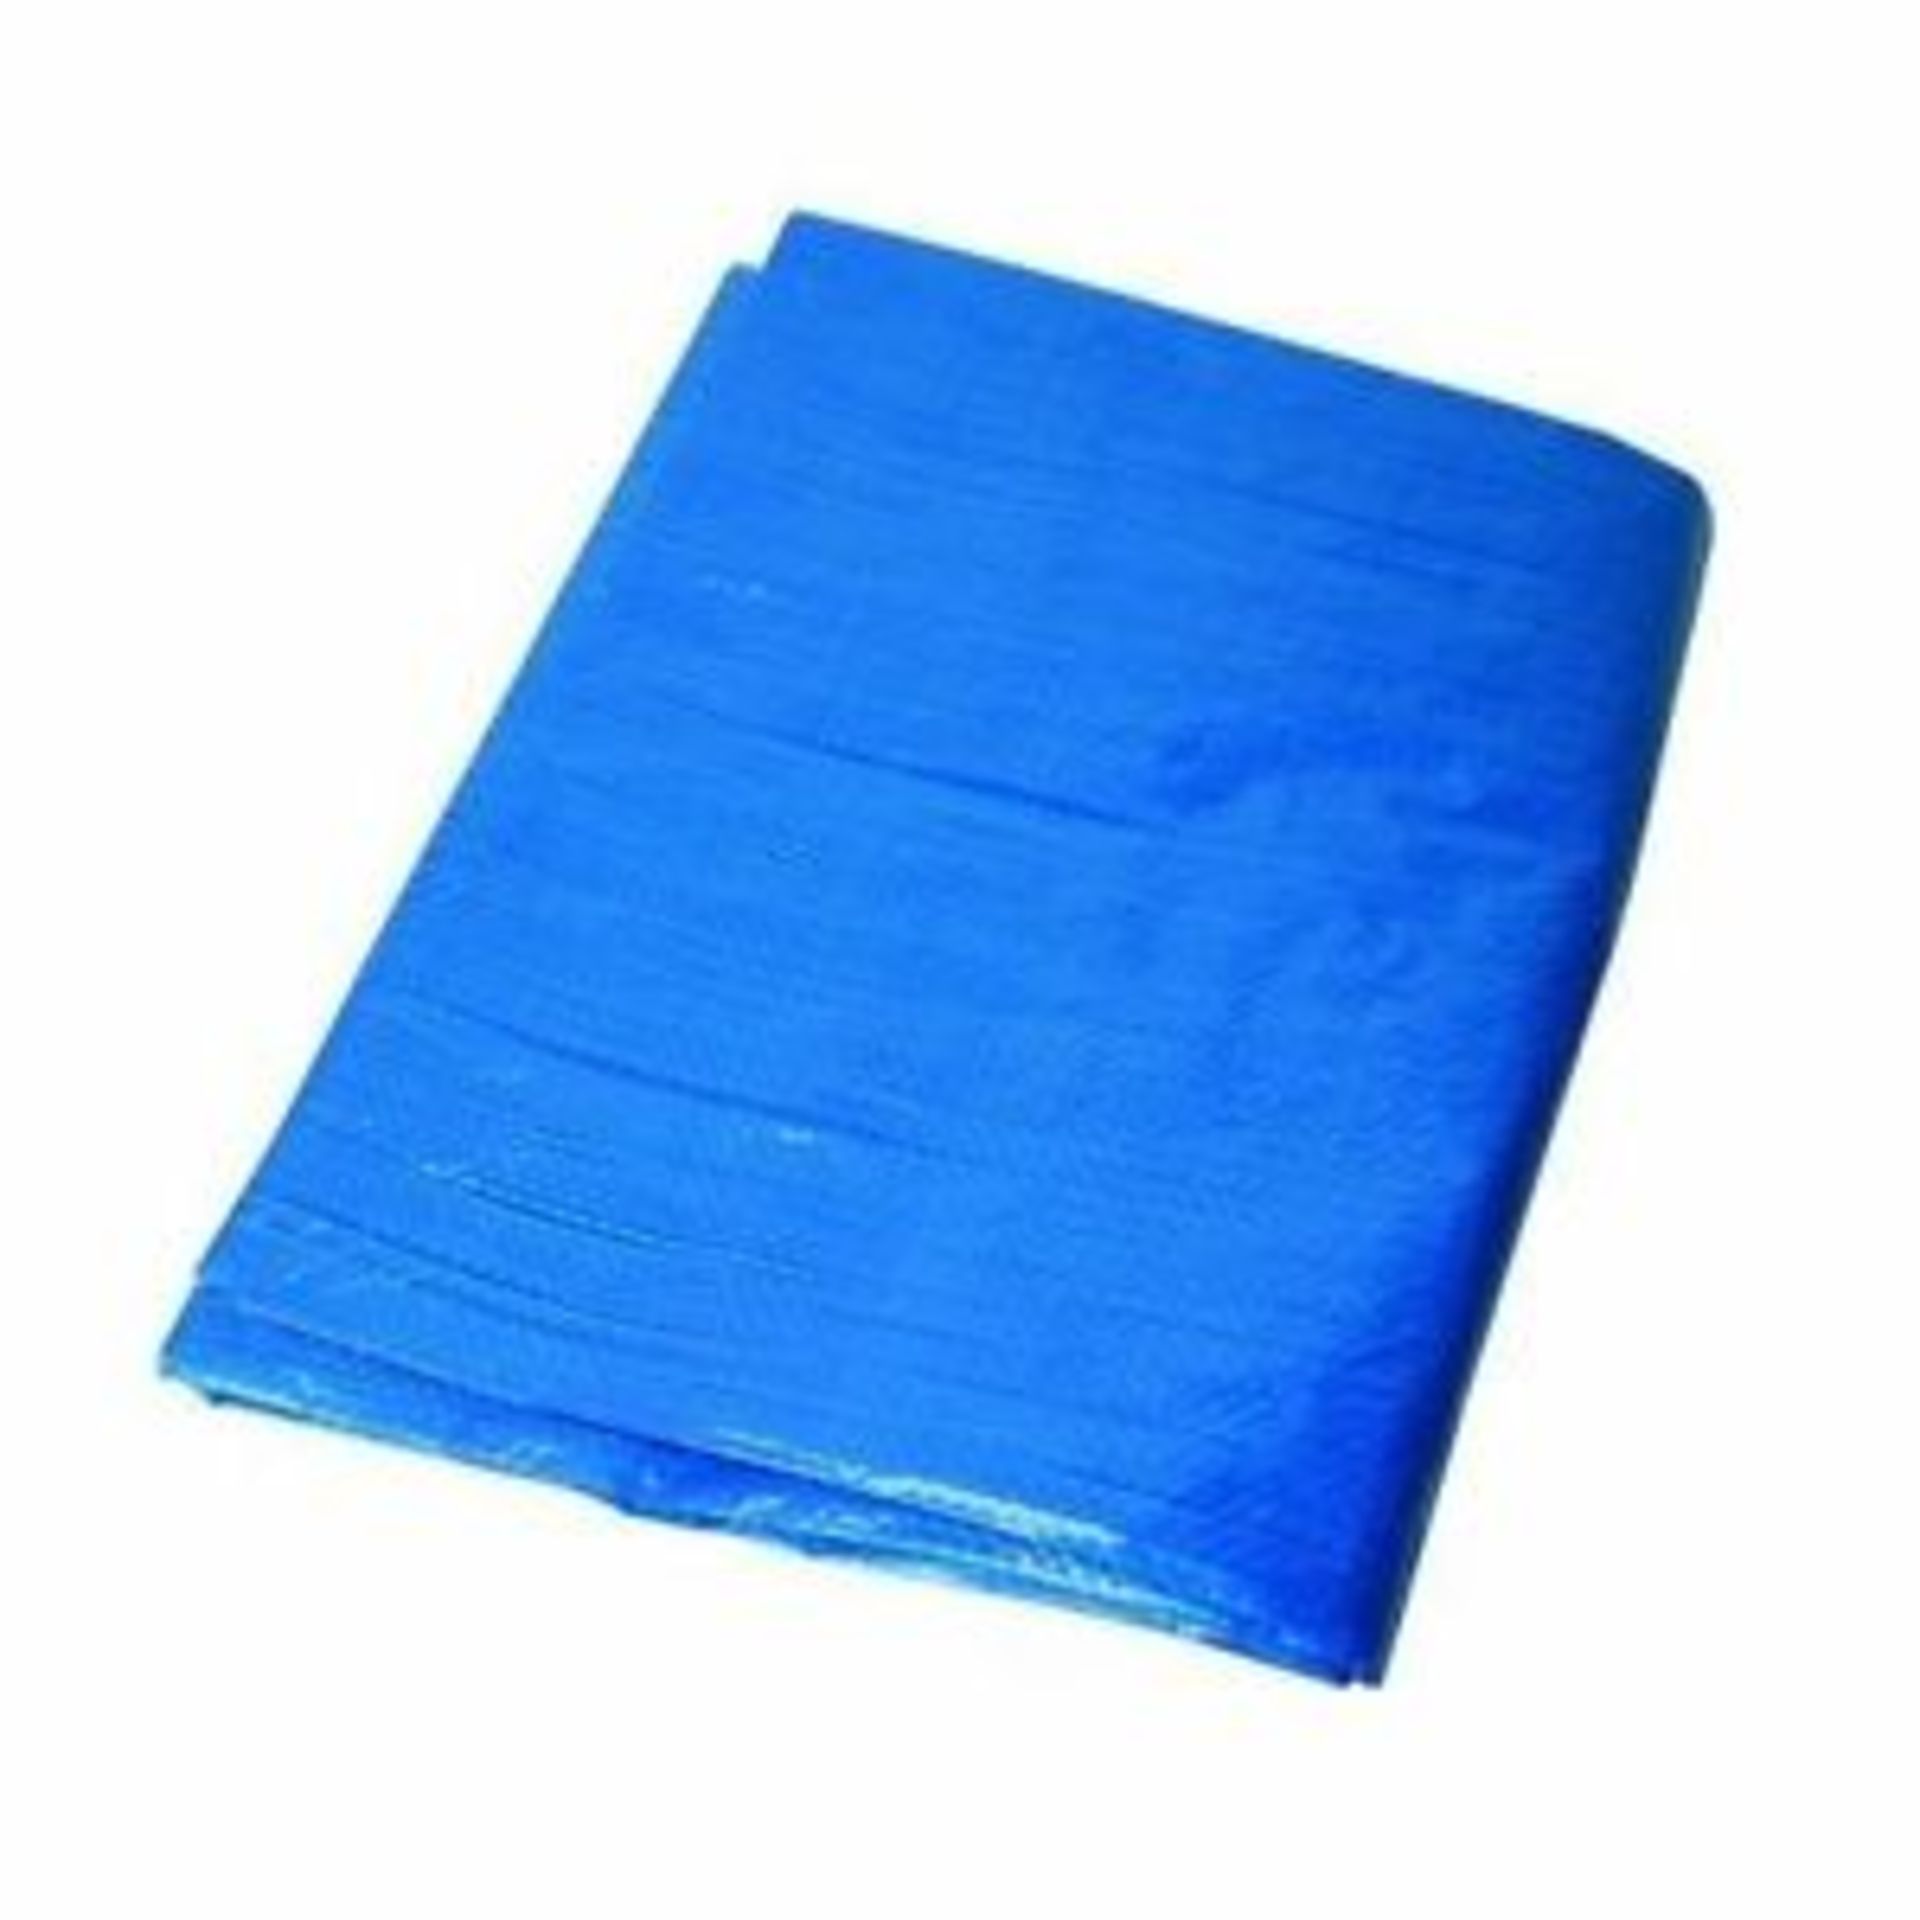 V *TRADE QTY* Brand New 12 x 8ft Blue Tarpaulin X 10 YOUR BID PRICE TO BE MULTIPLIED BY TEN